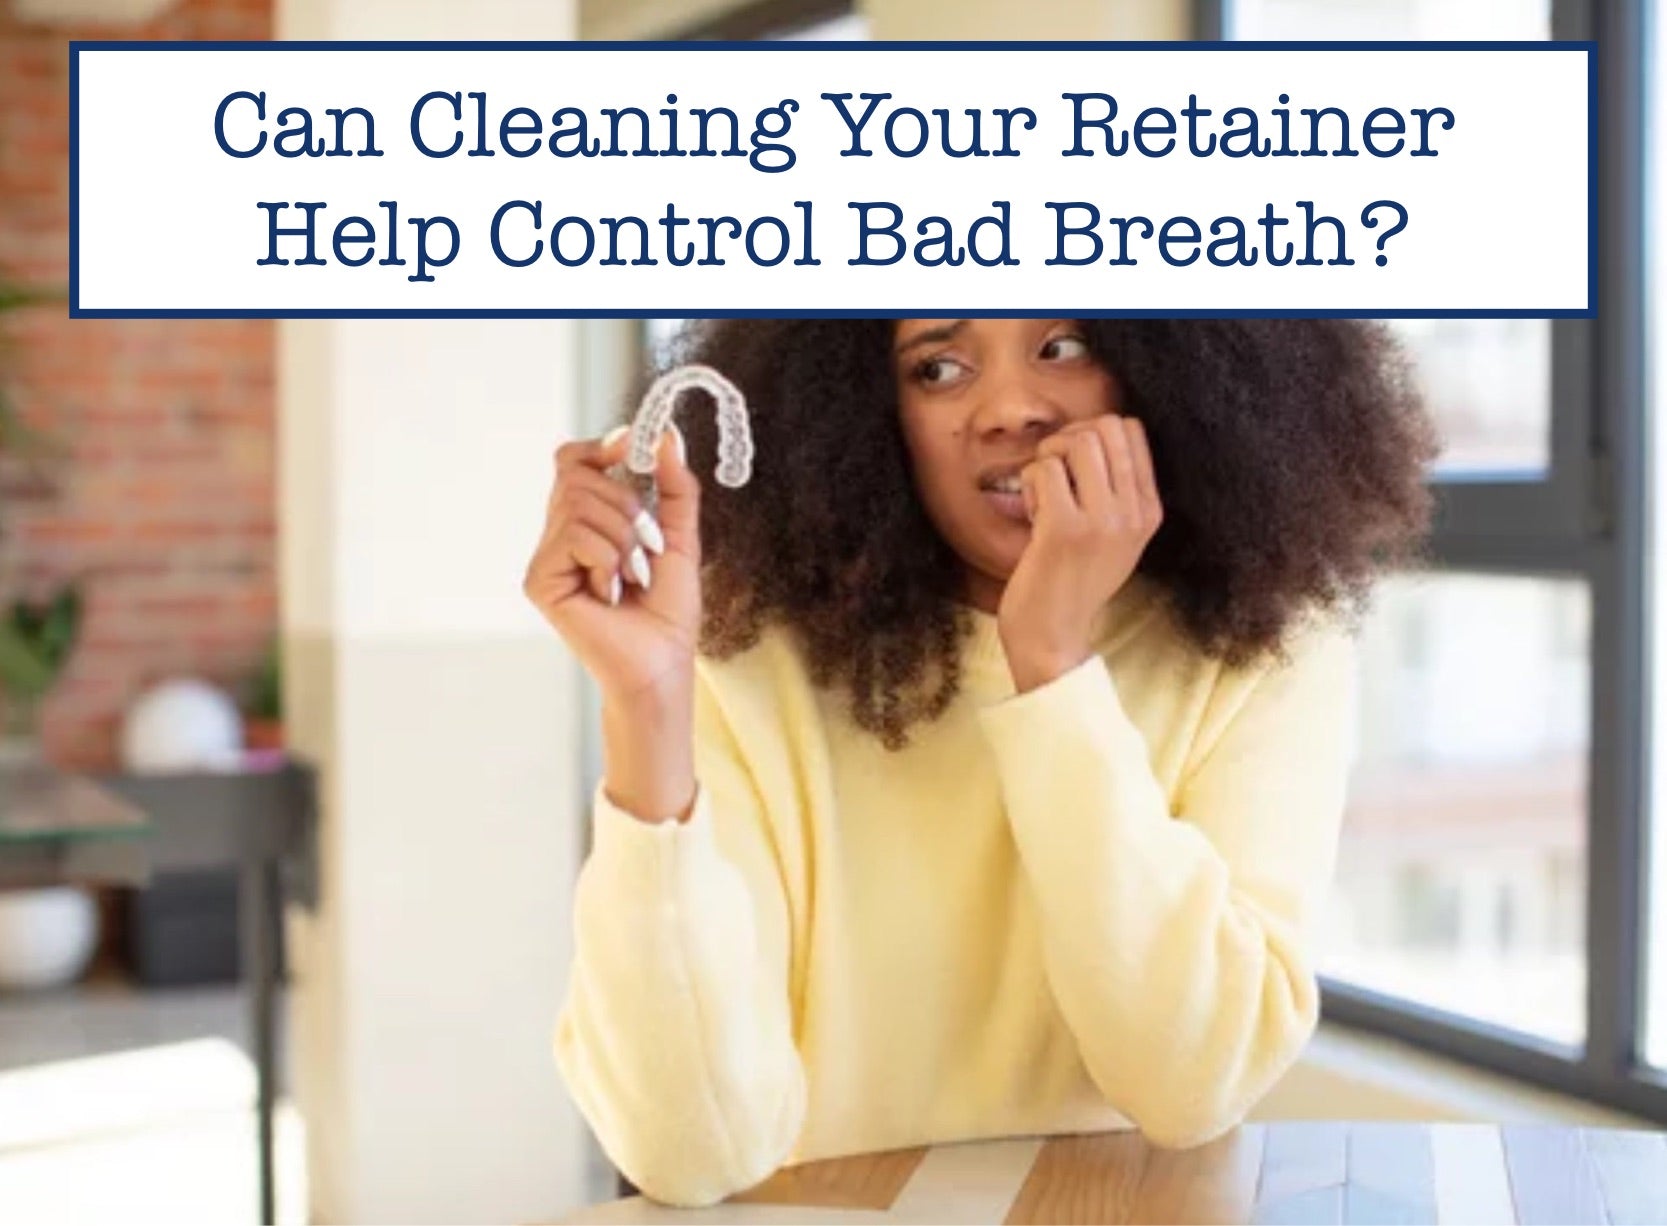 Can Cleaning Your Retainer Help Control Bad Breath?